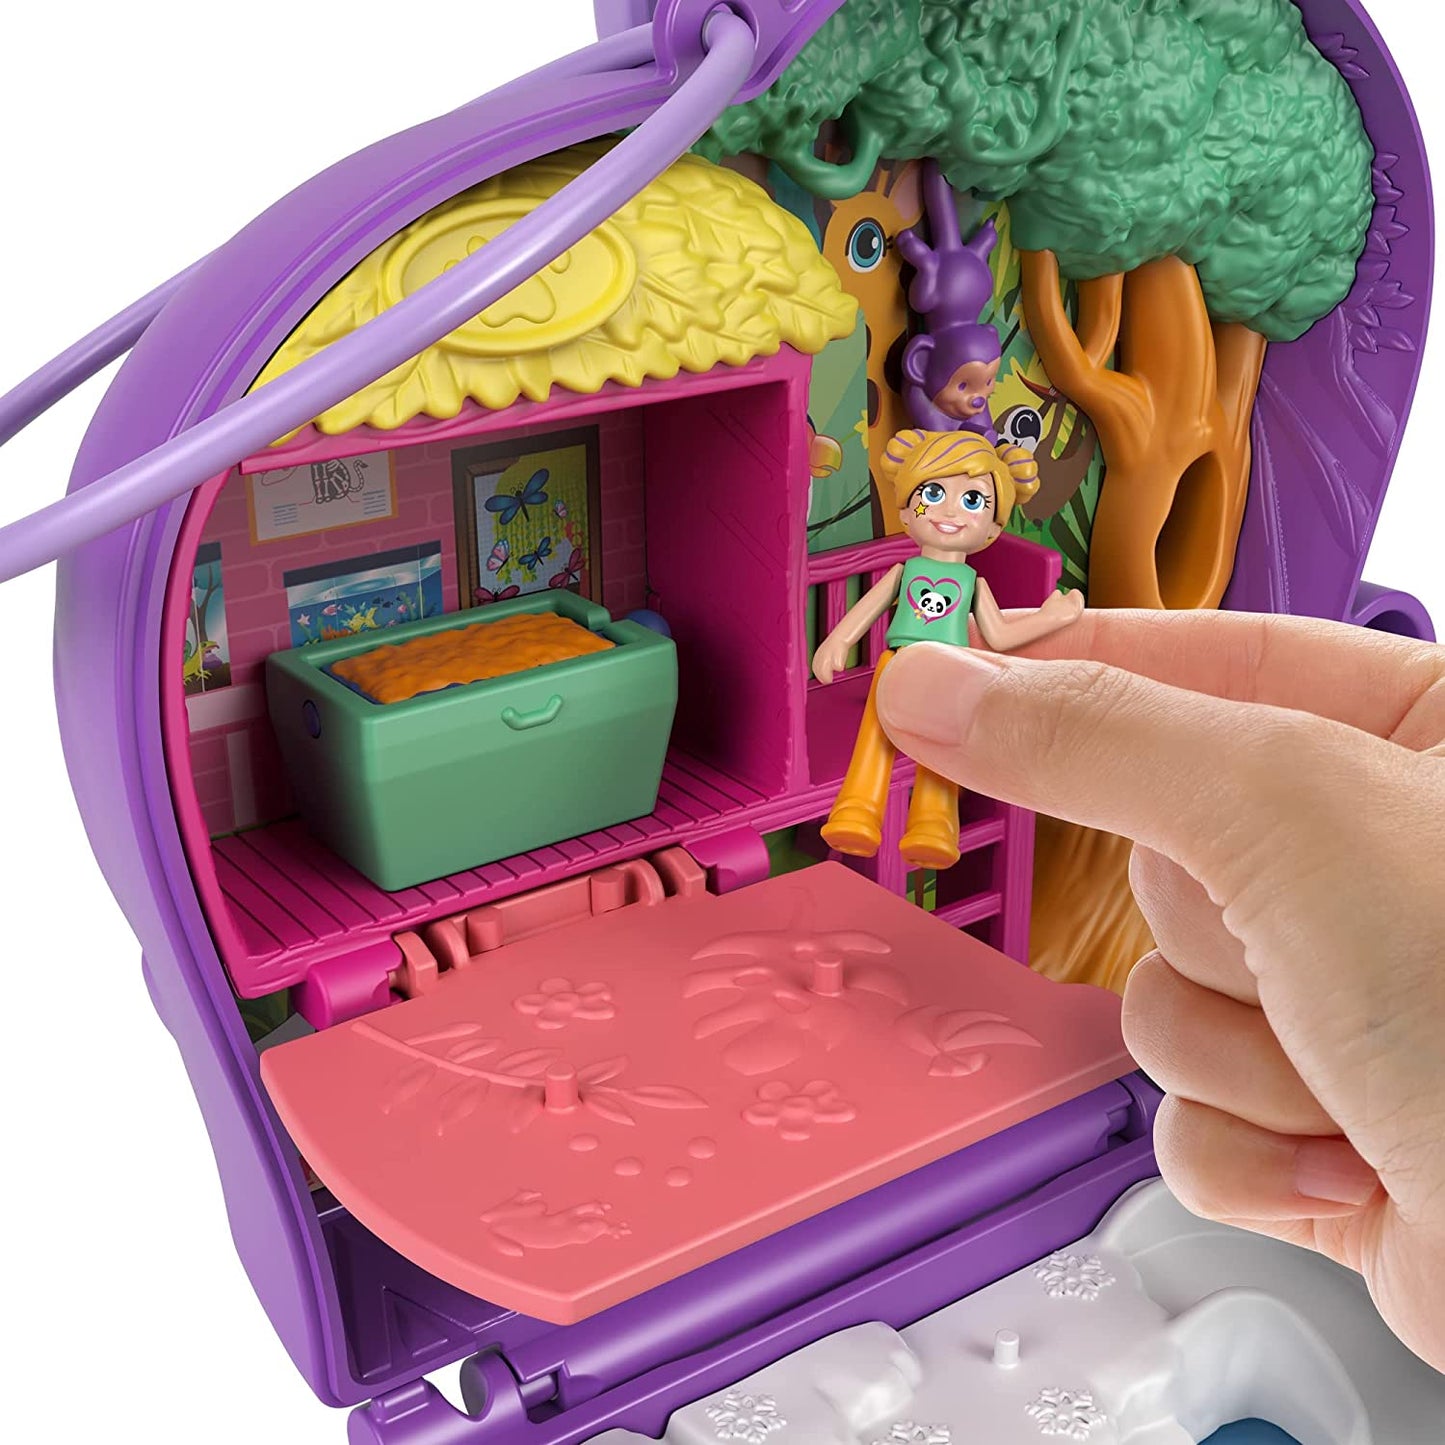 Polly Pocket Elephant Adventure Compact, Animal Theme with Micro Polly & Bella Dolls, 5 Reveals & 13 Related Accessories, Pop & Swap Feature